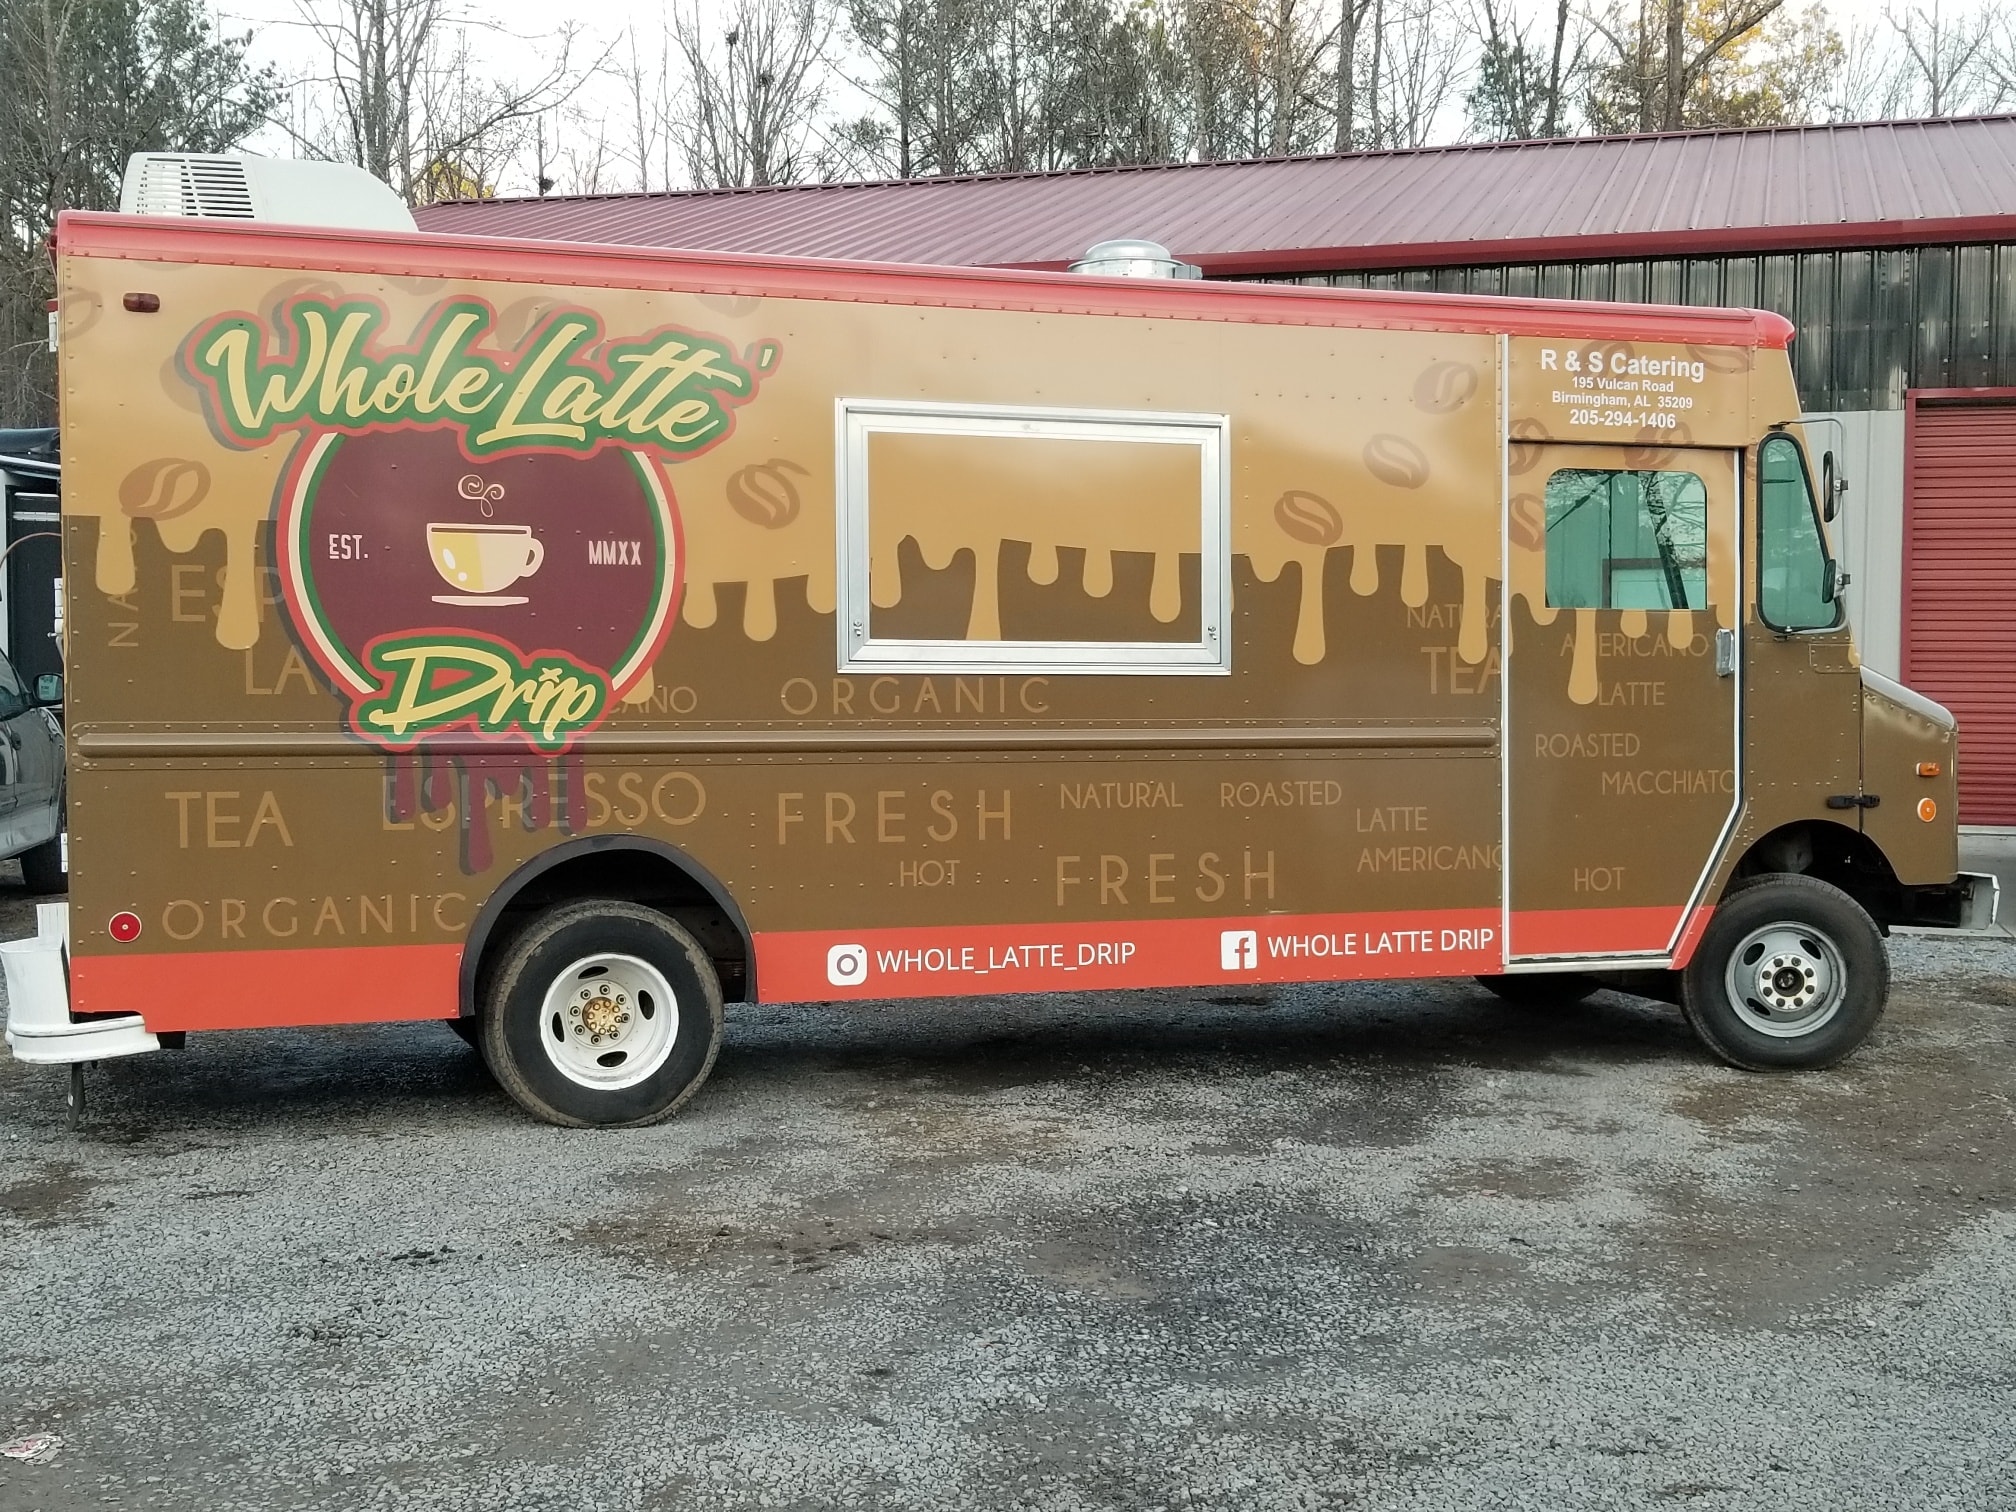 A food truck with colorful overlay and logo for Whole Latte Drip